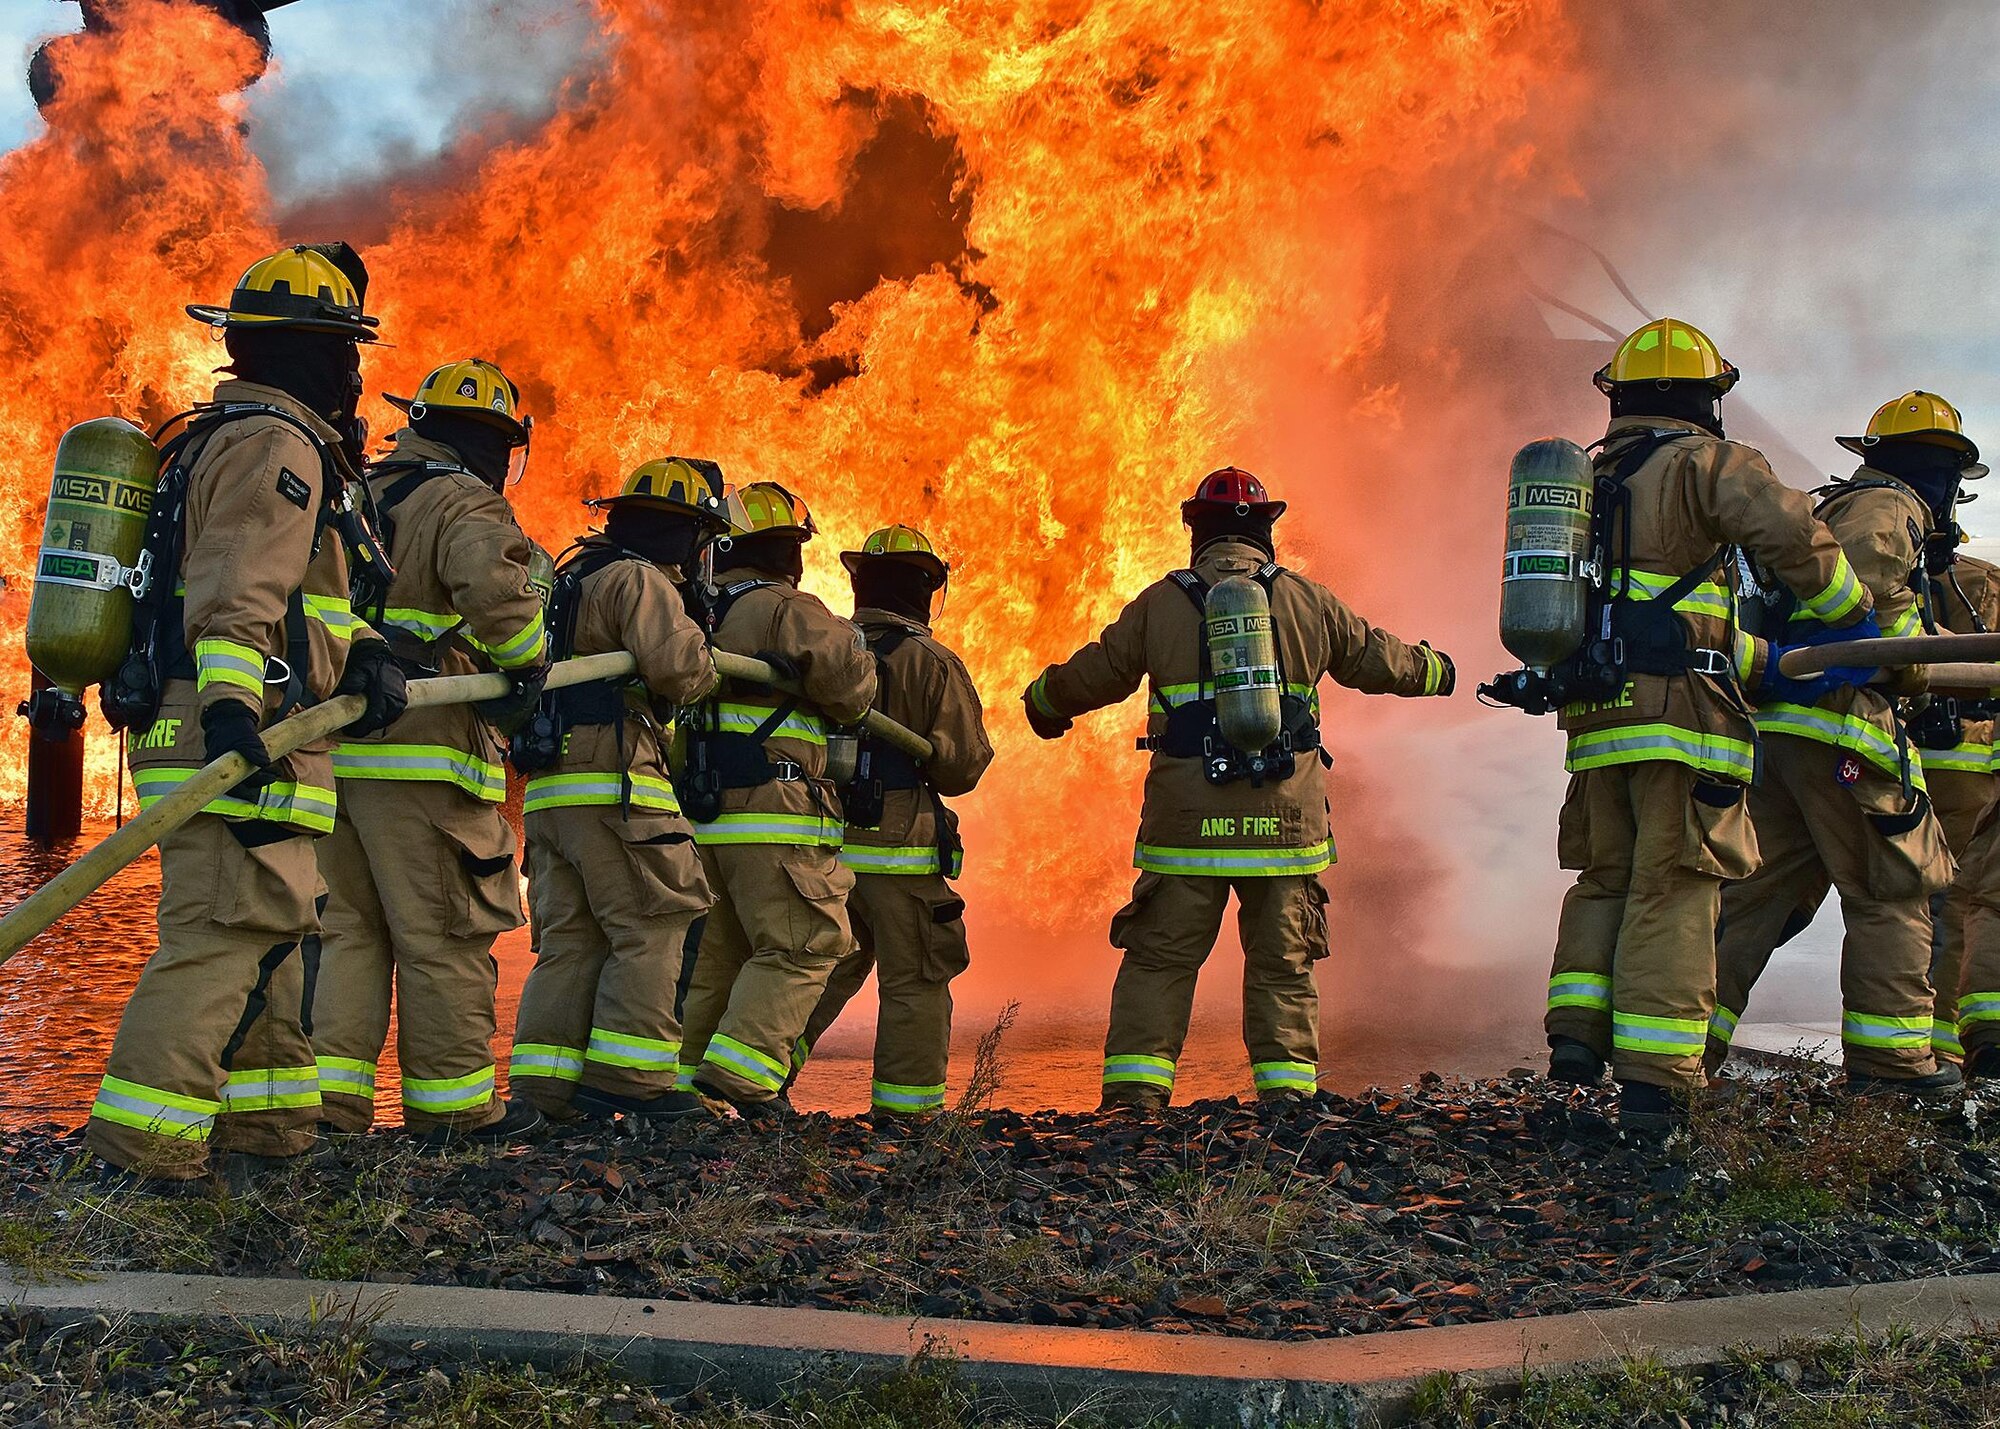 Military and Civilian members of the Quonset Fire Department from the 143d Airlift Wing, Rhode Island Air National Guard conduct live fire training at Westover Air Reserve Base, Chicopee, Massachusetts, September 29, 2016. The live fire training is part of annual qualification requirements and allows military and civilians to train in collaboration. US Air National Guard Photo by Master Sgt Janeen Miller